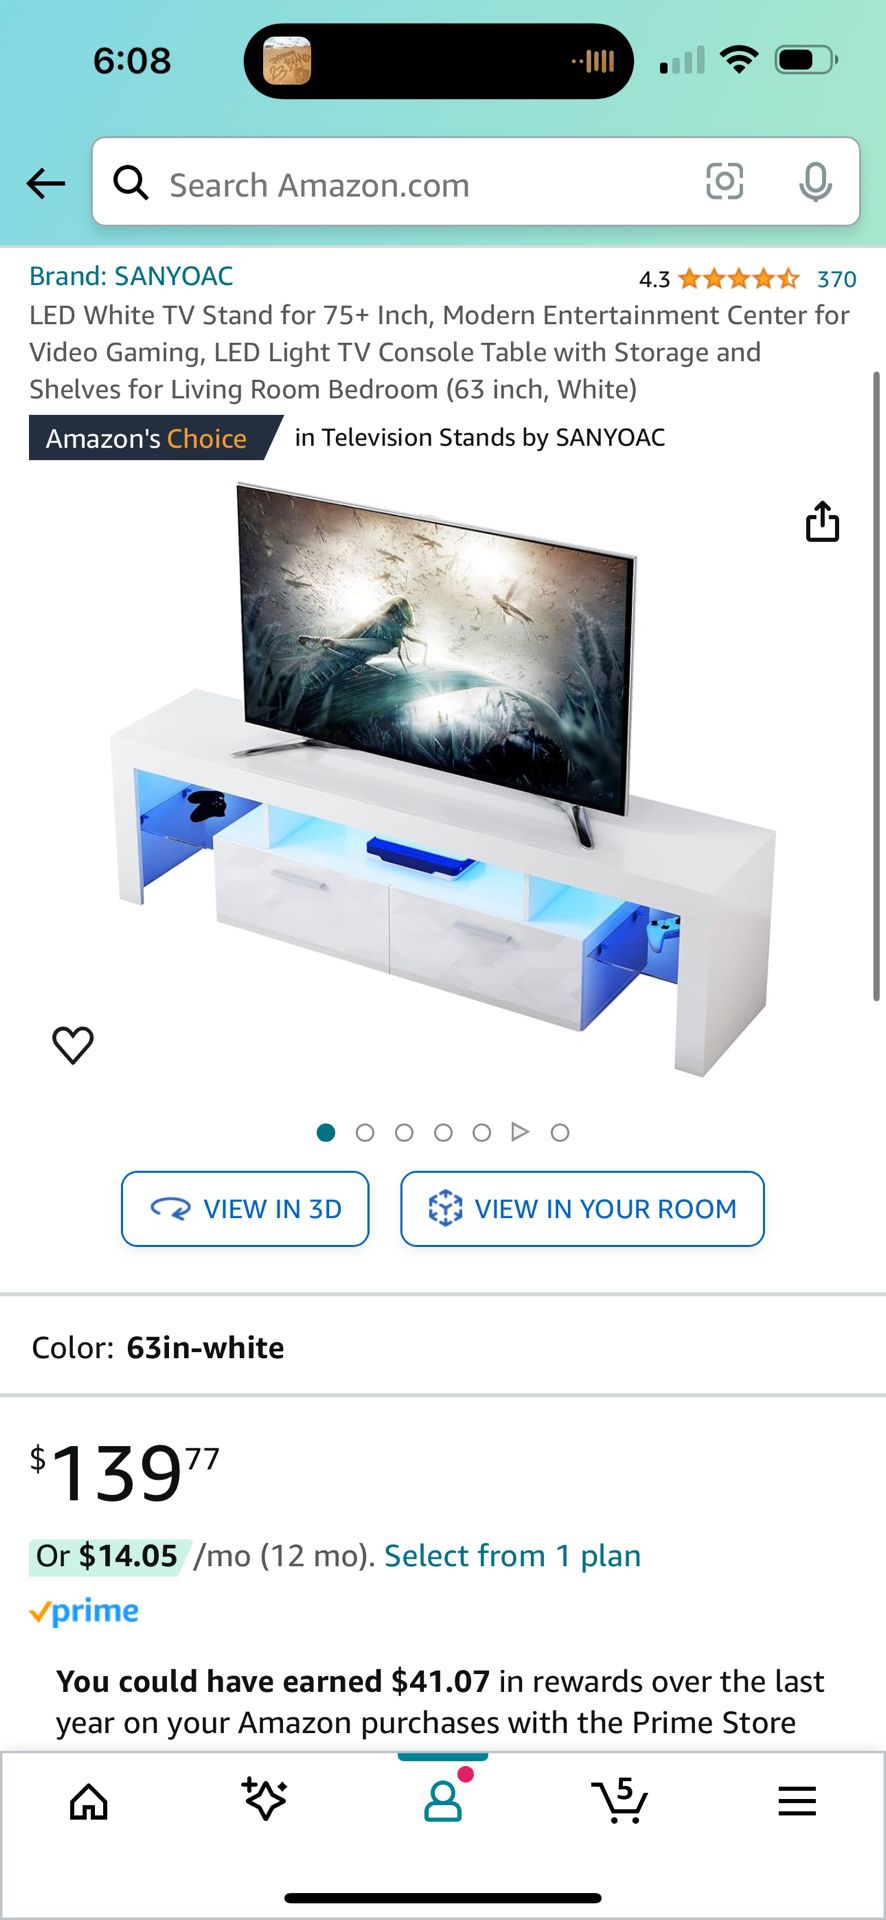 LED White TV Stand for 75+ Inch, Modern Entertainment Center for Video Gaming, LED Light TV Console Table with Storage and Shelves for Living Room Bed